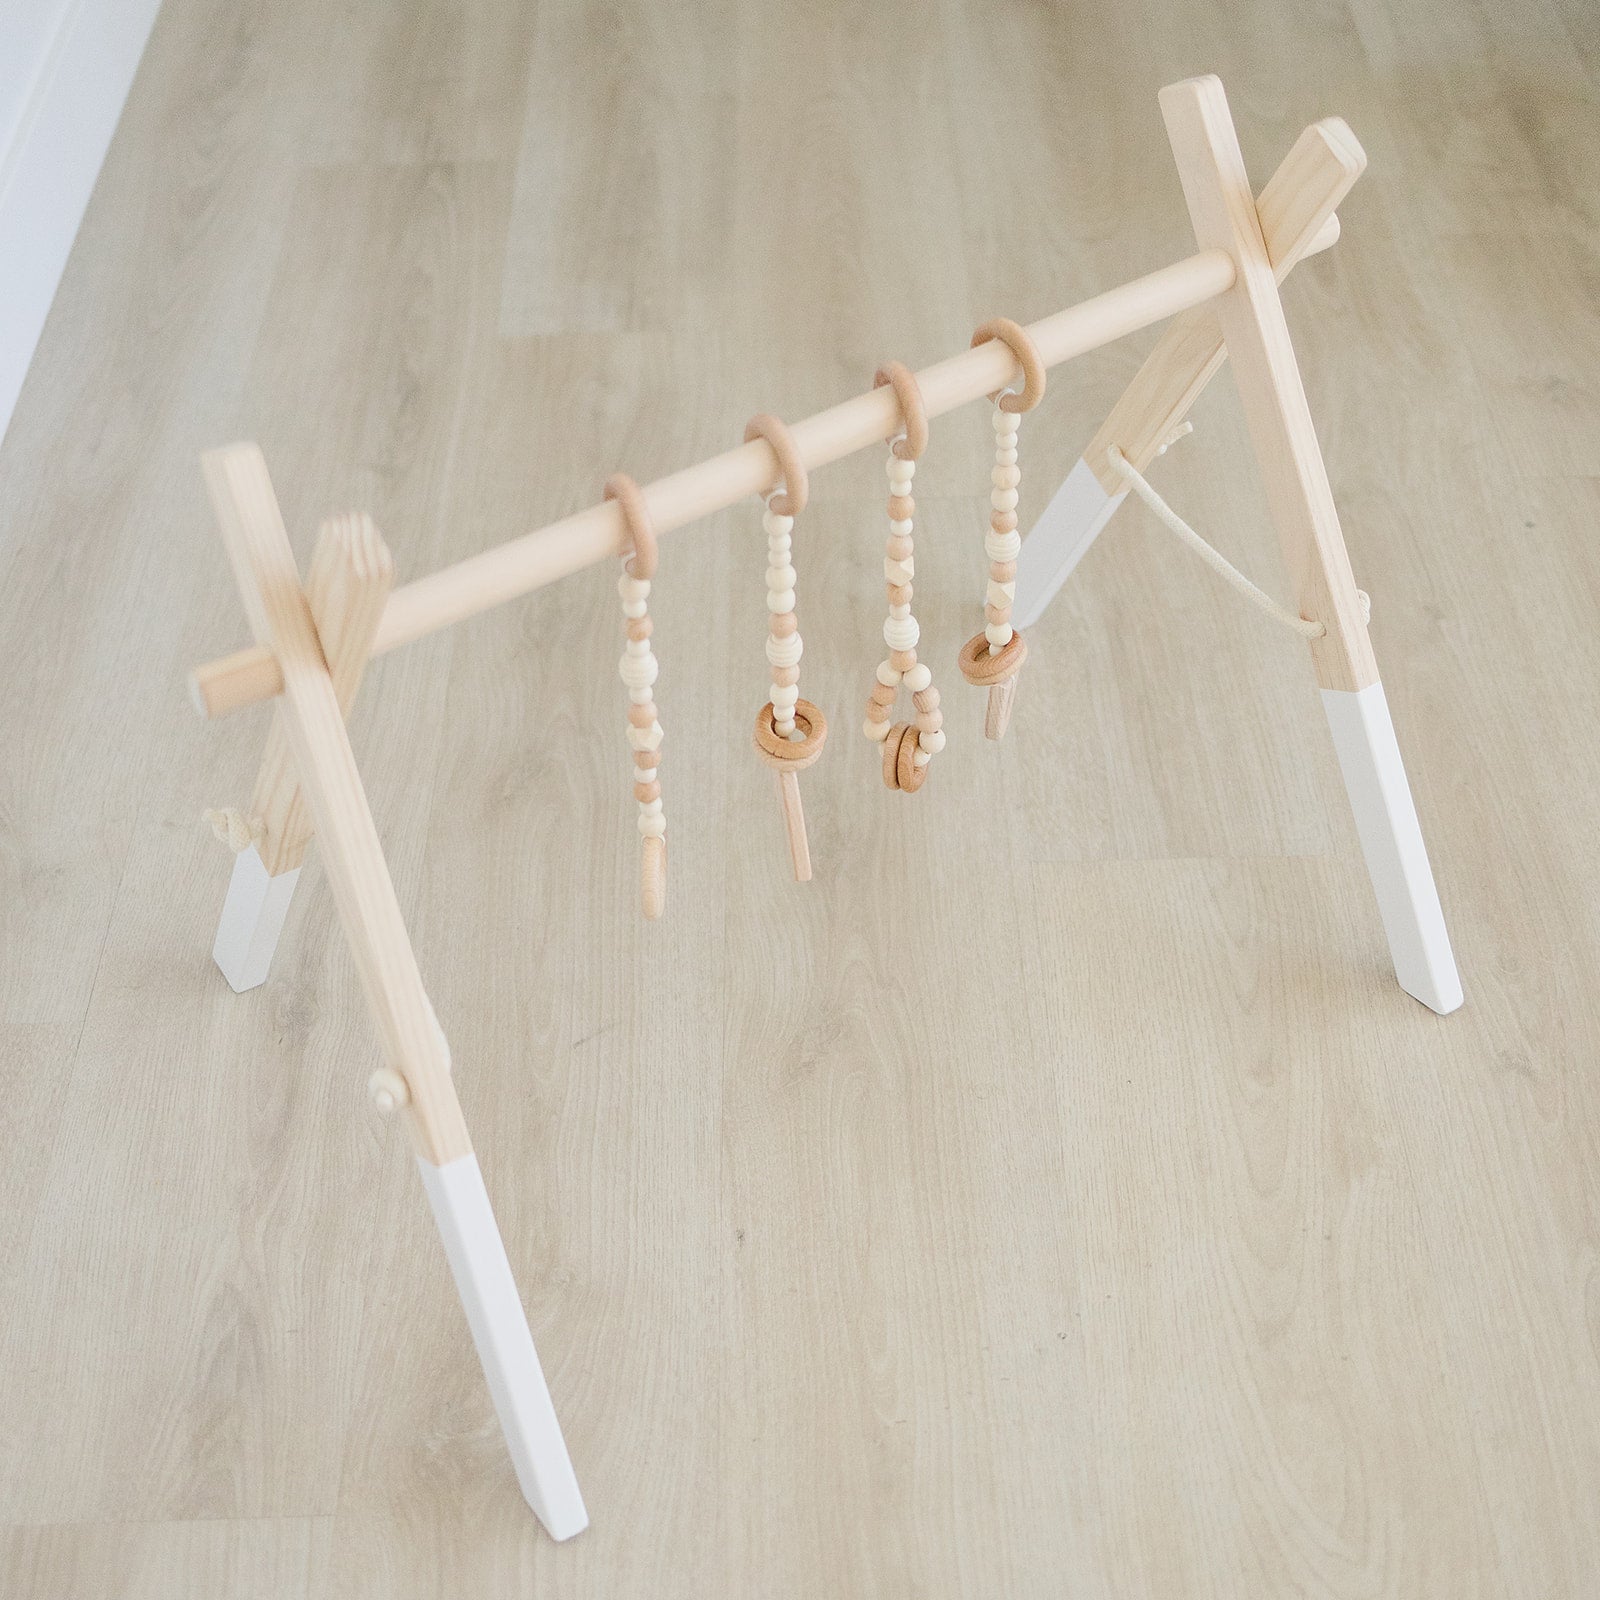 Wooden Baby Gym + Natural Wood Toys  - Poppyseed Play